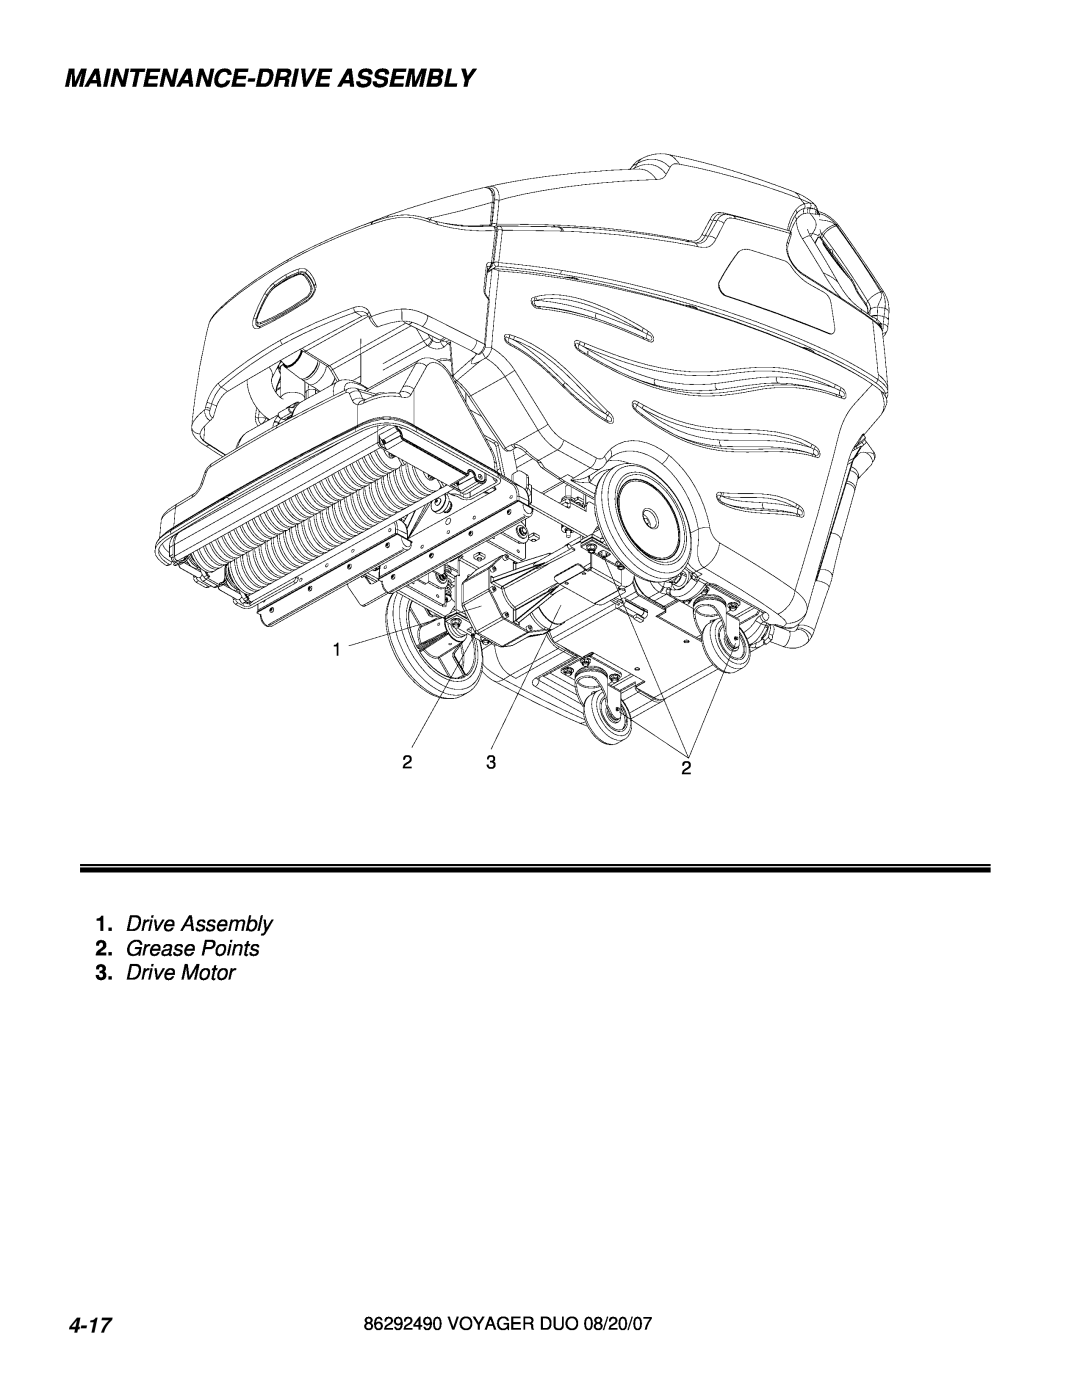 Windsor 10086130, 10086150 manual Maintenance-Driveassembly, Drive Assembly 2.Grease Points 3.Drive Motor, 4-17 